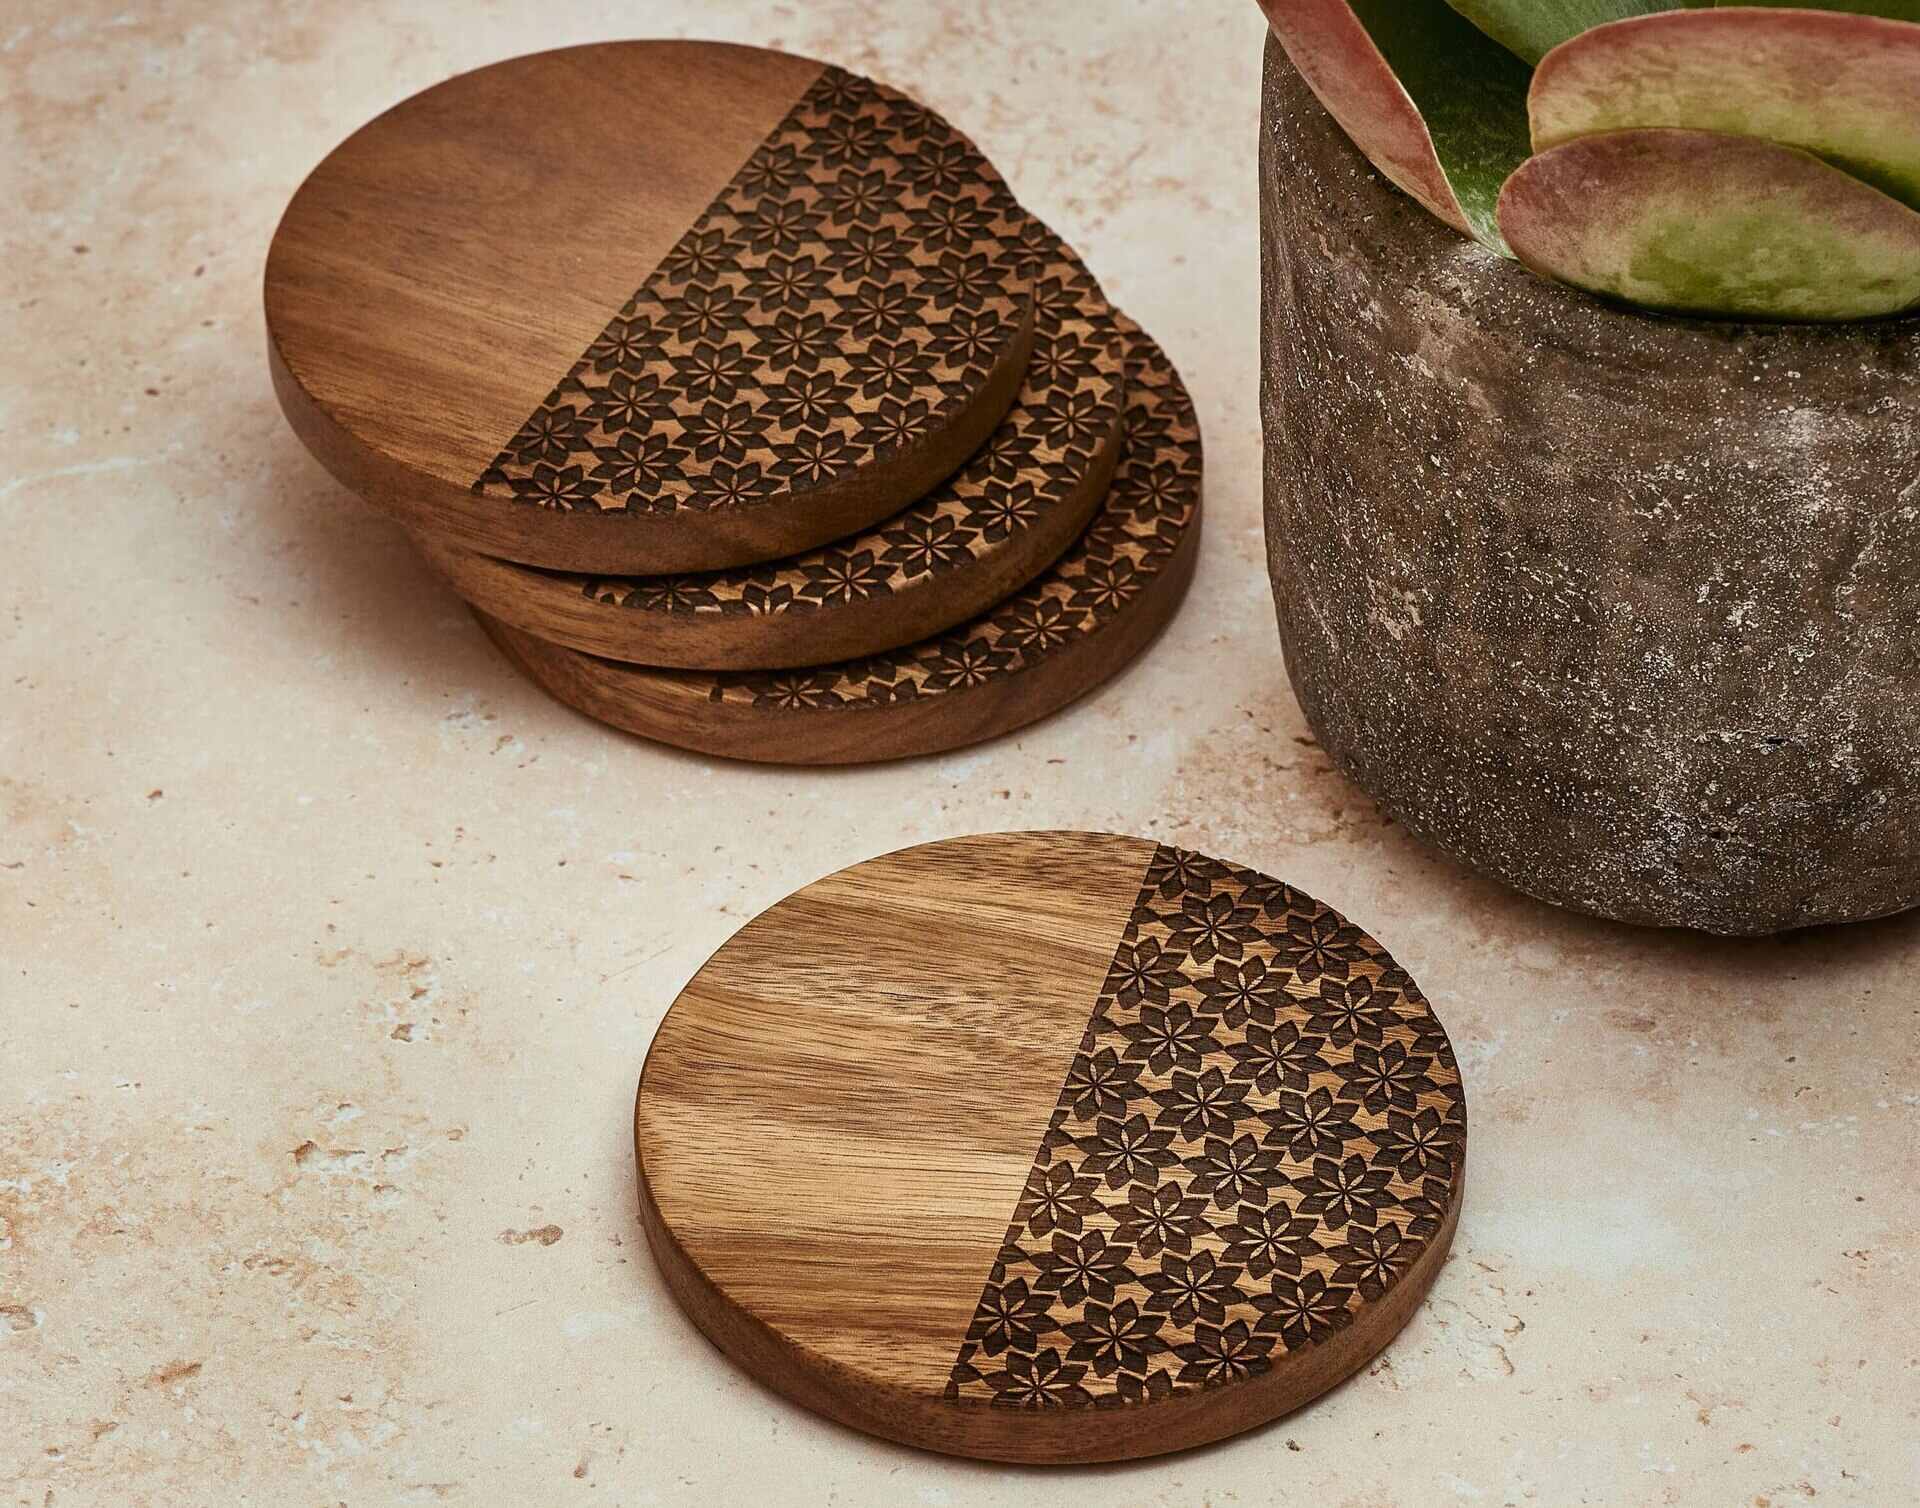  16 Pieces Unfinished Wood Coasters, 4 Inch Square Acacia Wooden  Coasters for Crafts with Non-Slip Silicon Dots for DIY Stained Painting  Wood Engraving Home Decoration